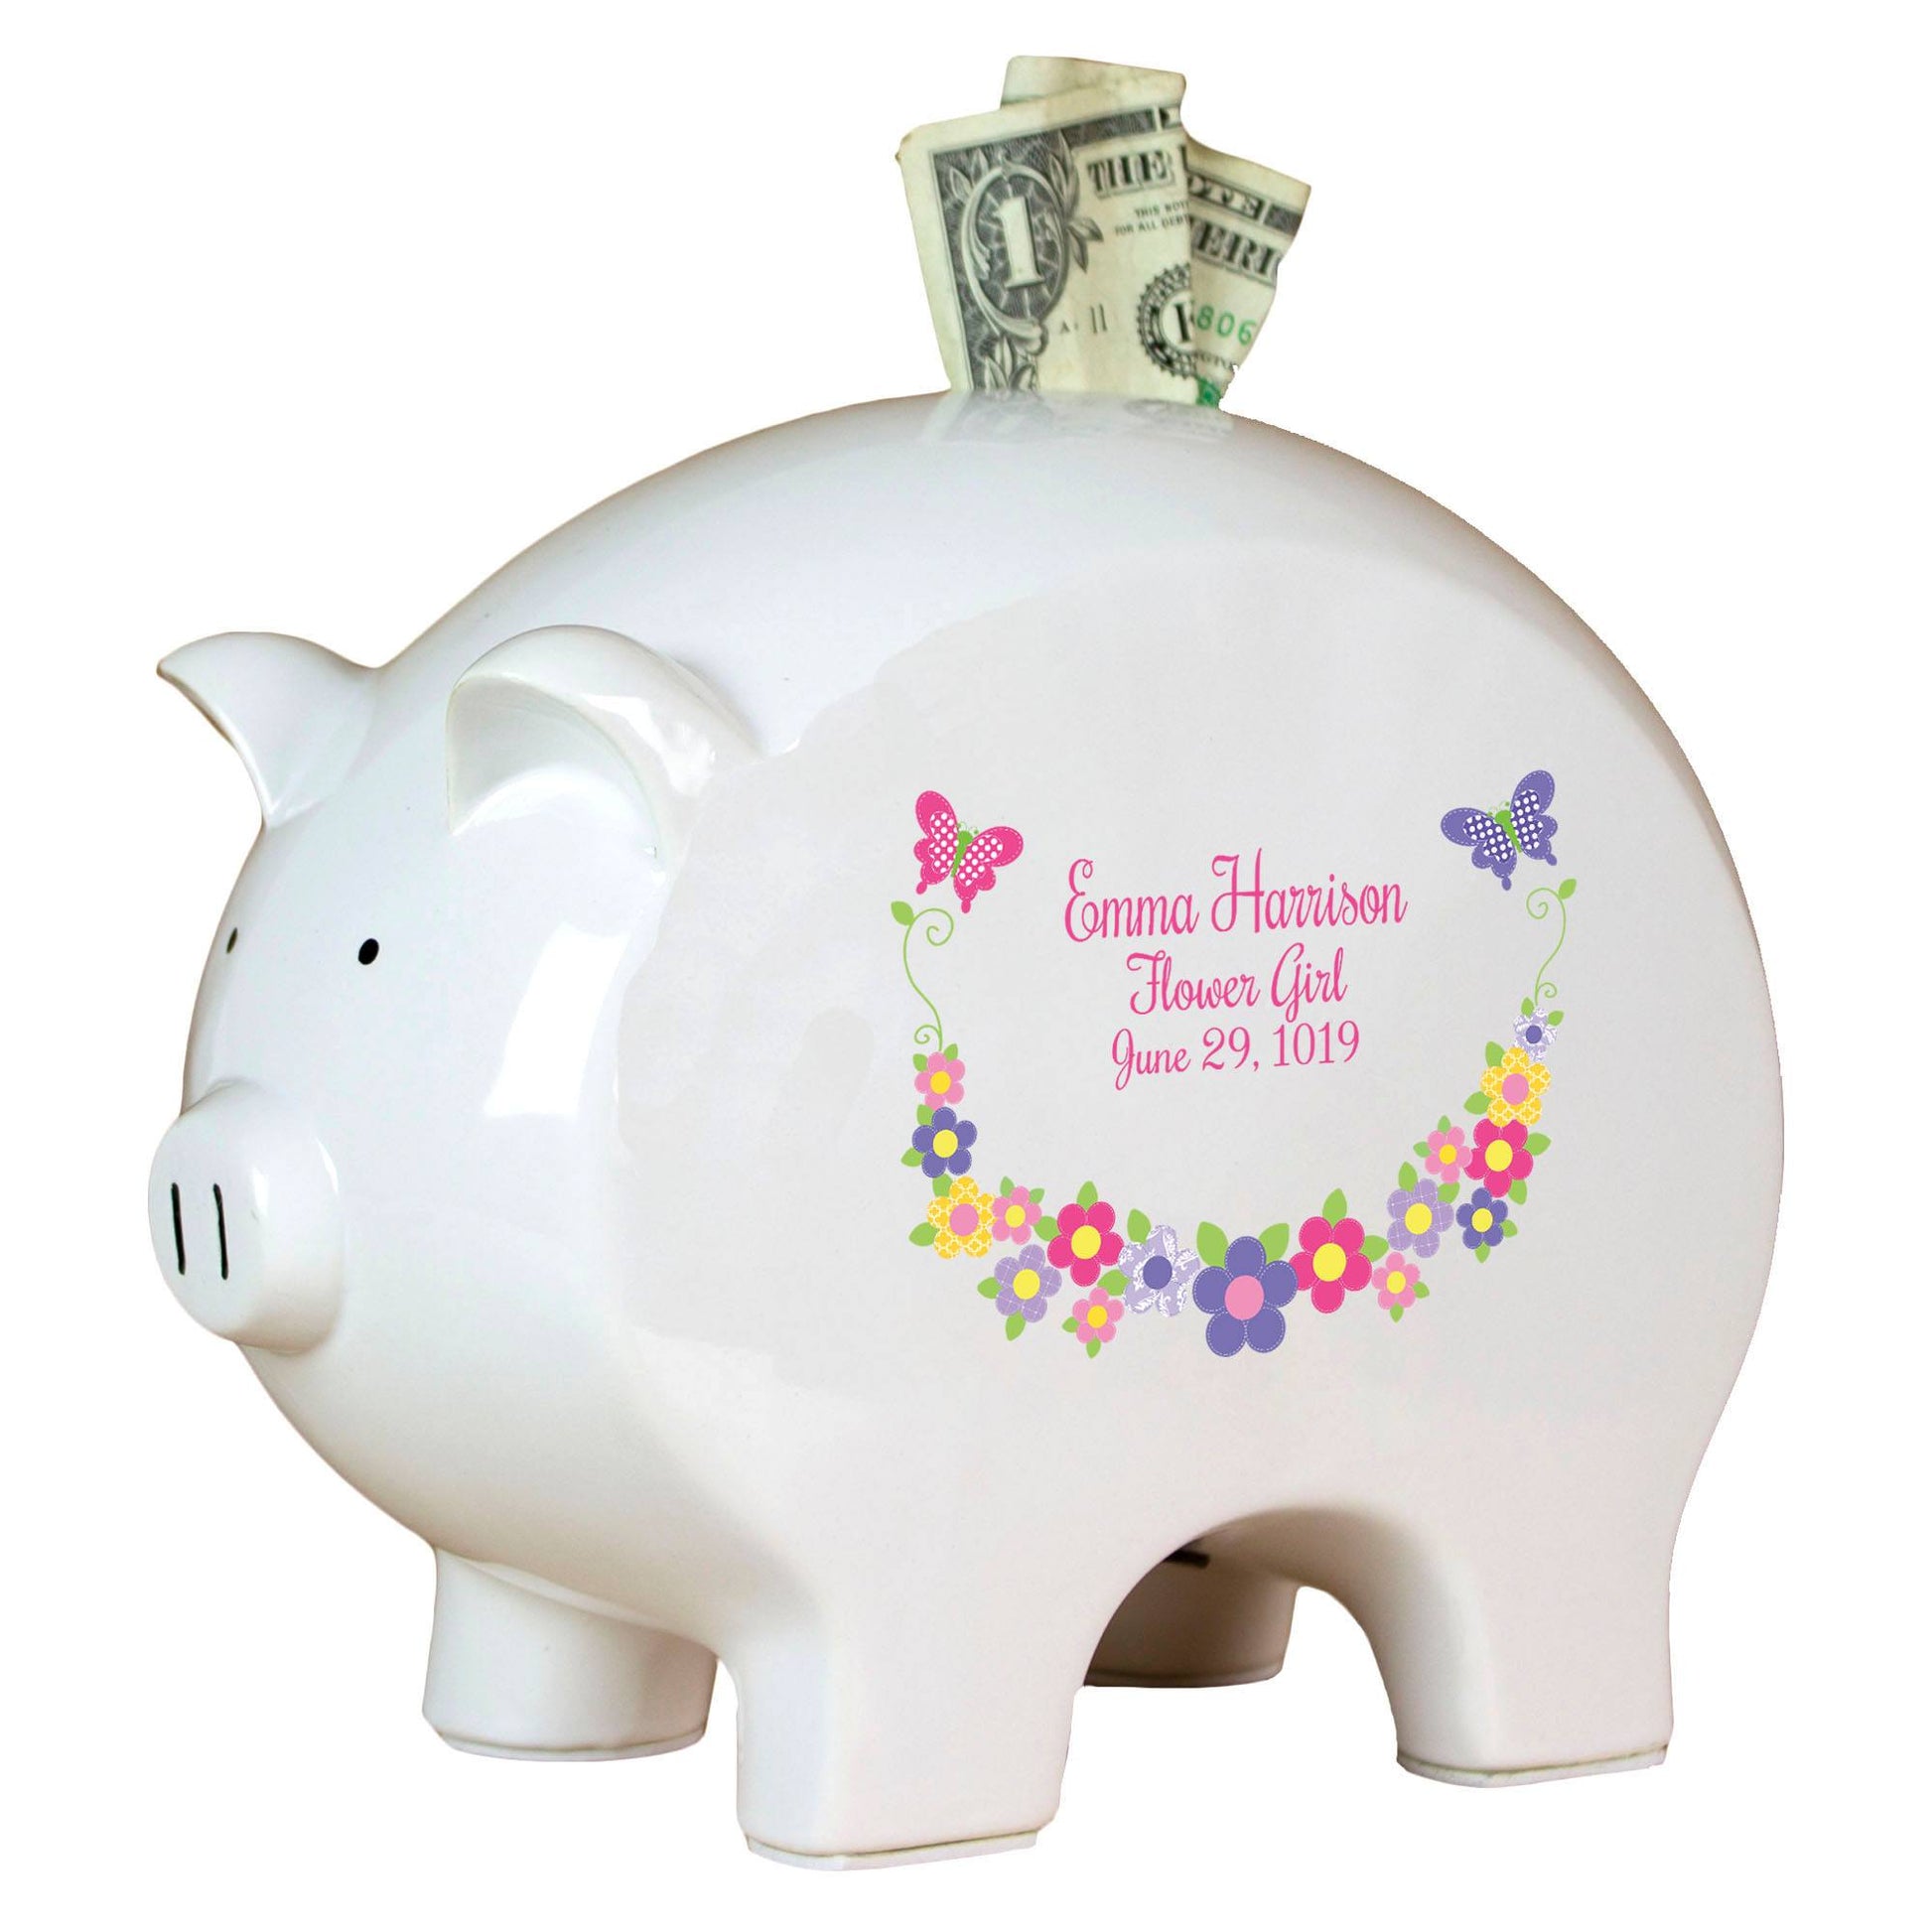 Personalized Piggy Bank with Pastel Butterflies design